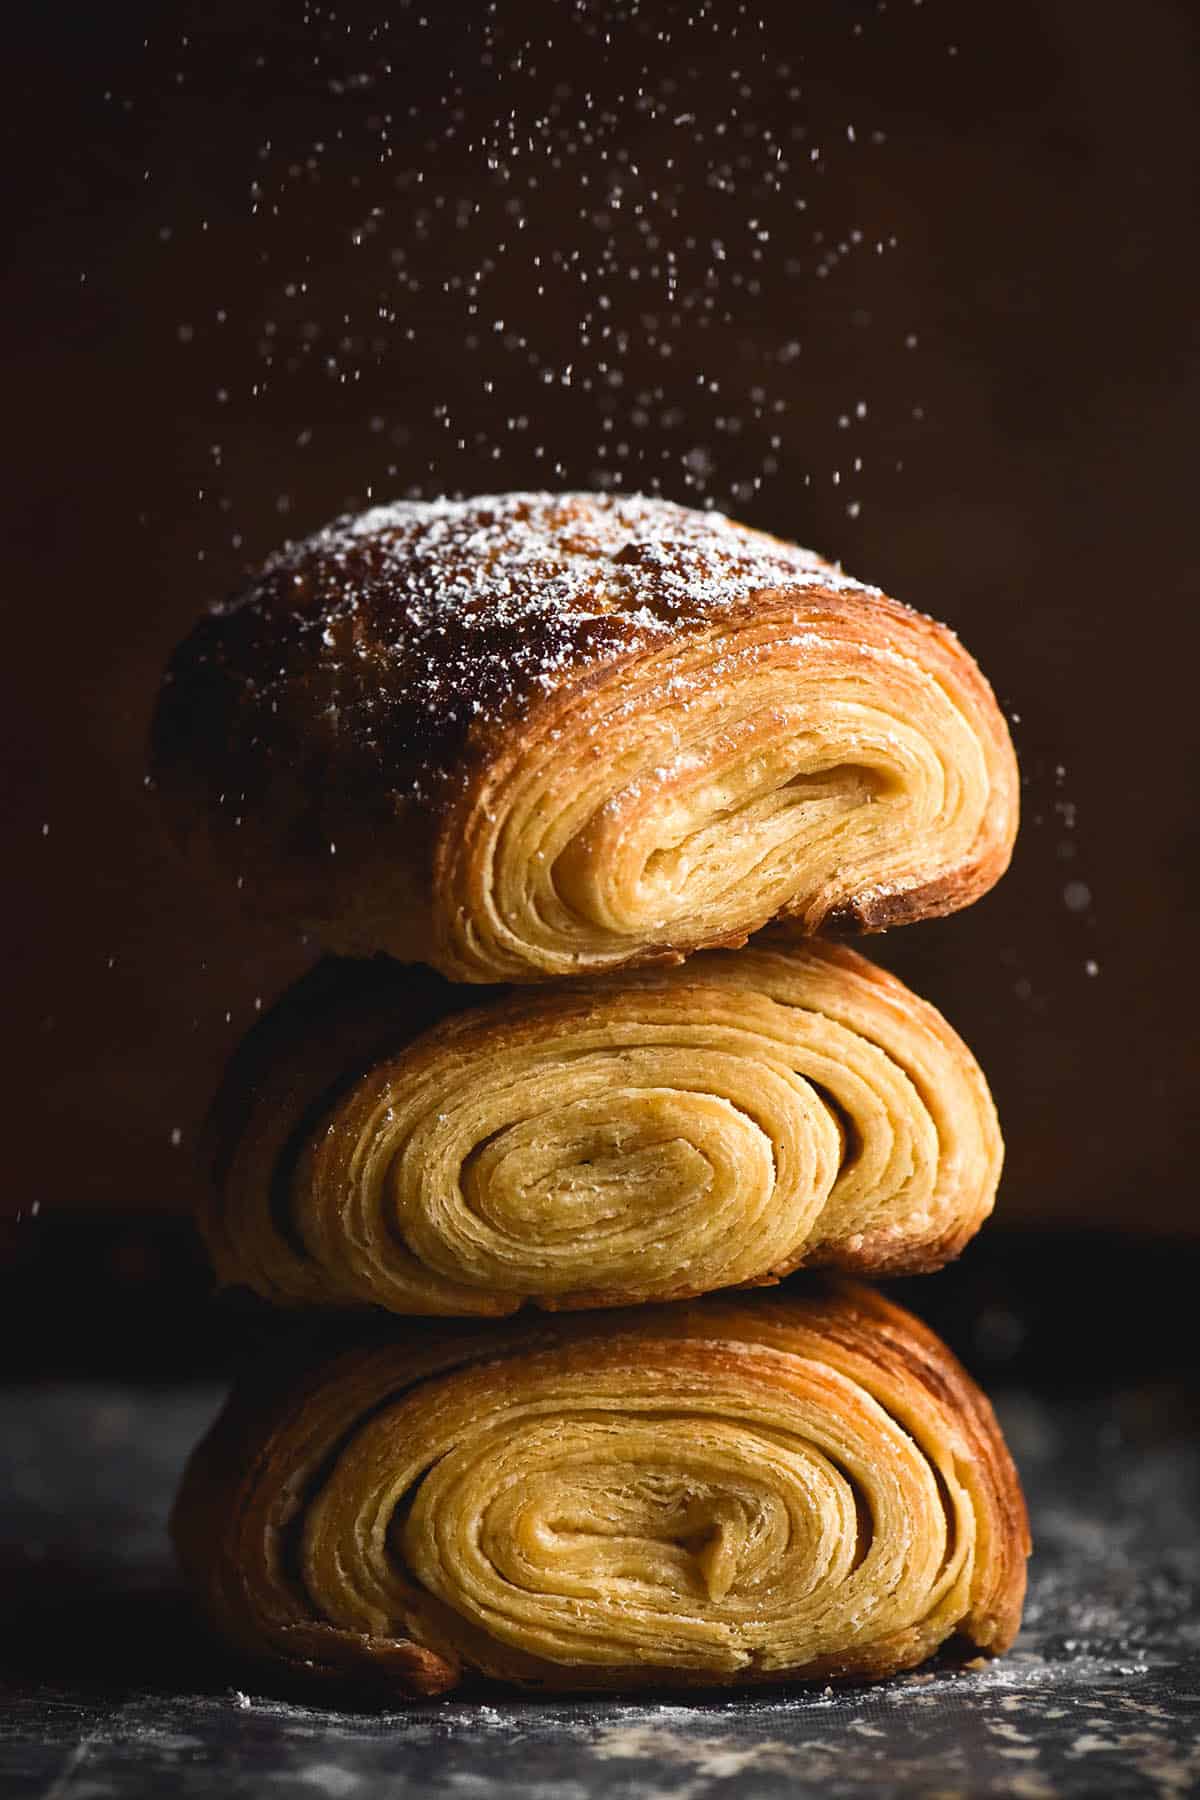 A moody, macro side on view of a stack of three gluten free pains au chocolat. The pastries sit atop a dark coloured baking tray against a dark backdrop. Icing sugar sprinkles from the top of the shot onto the top pastry. The pastries face the camera so that the swirl of lamination is visible